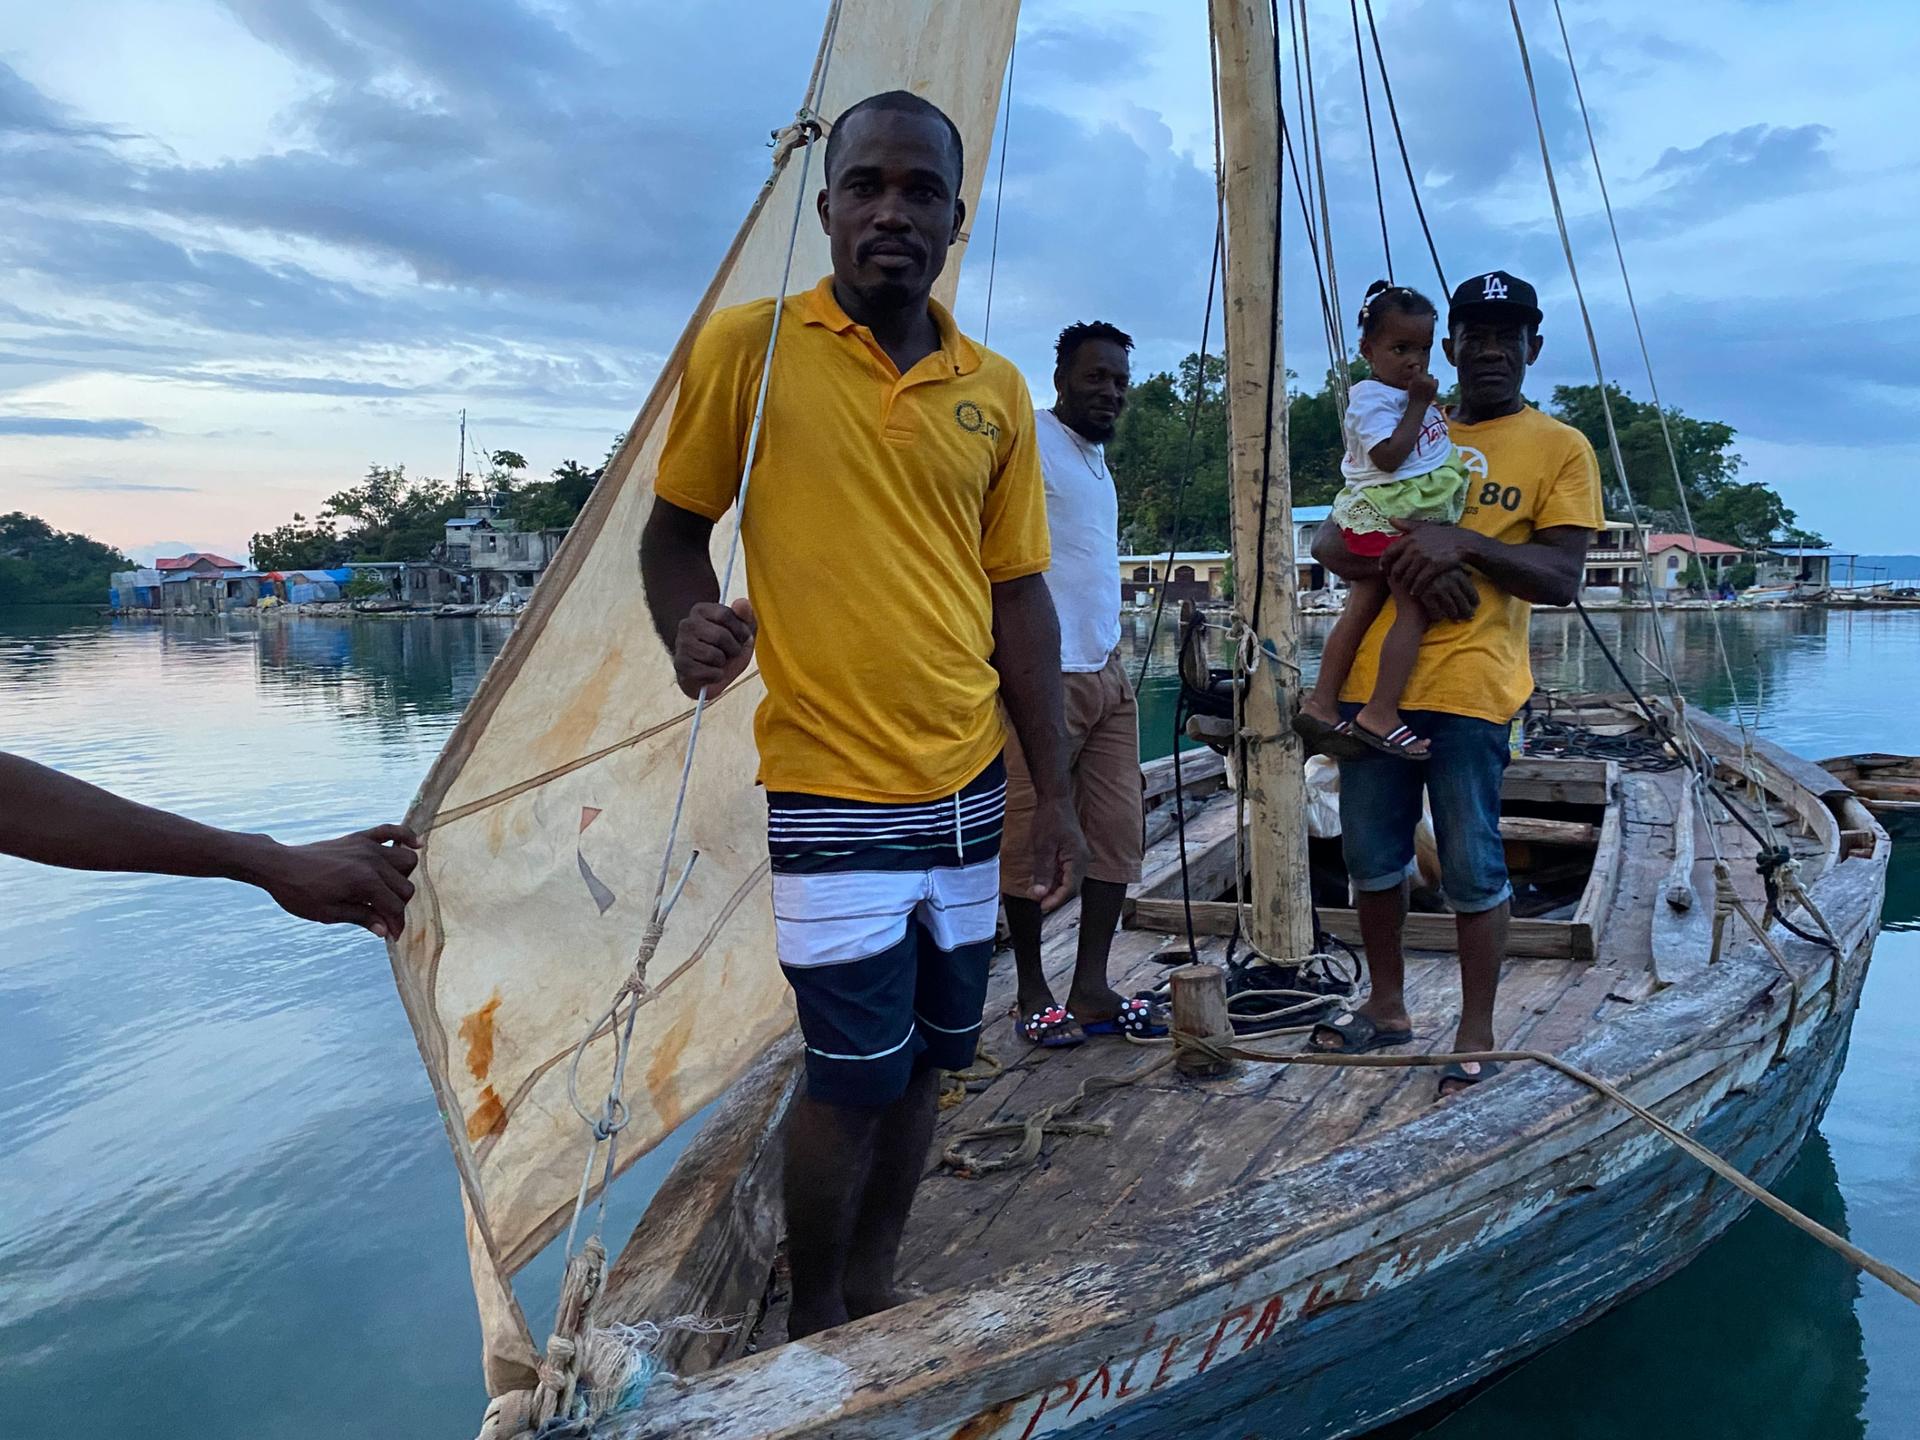 In Pestel, Haiti, on the country's southern peninsula, Jean-Robert Leger, front, stands in a boat that is a bit smaller than the one he has attempted in to sail to the United States, along with many other migrants aboard. 